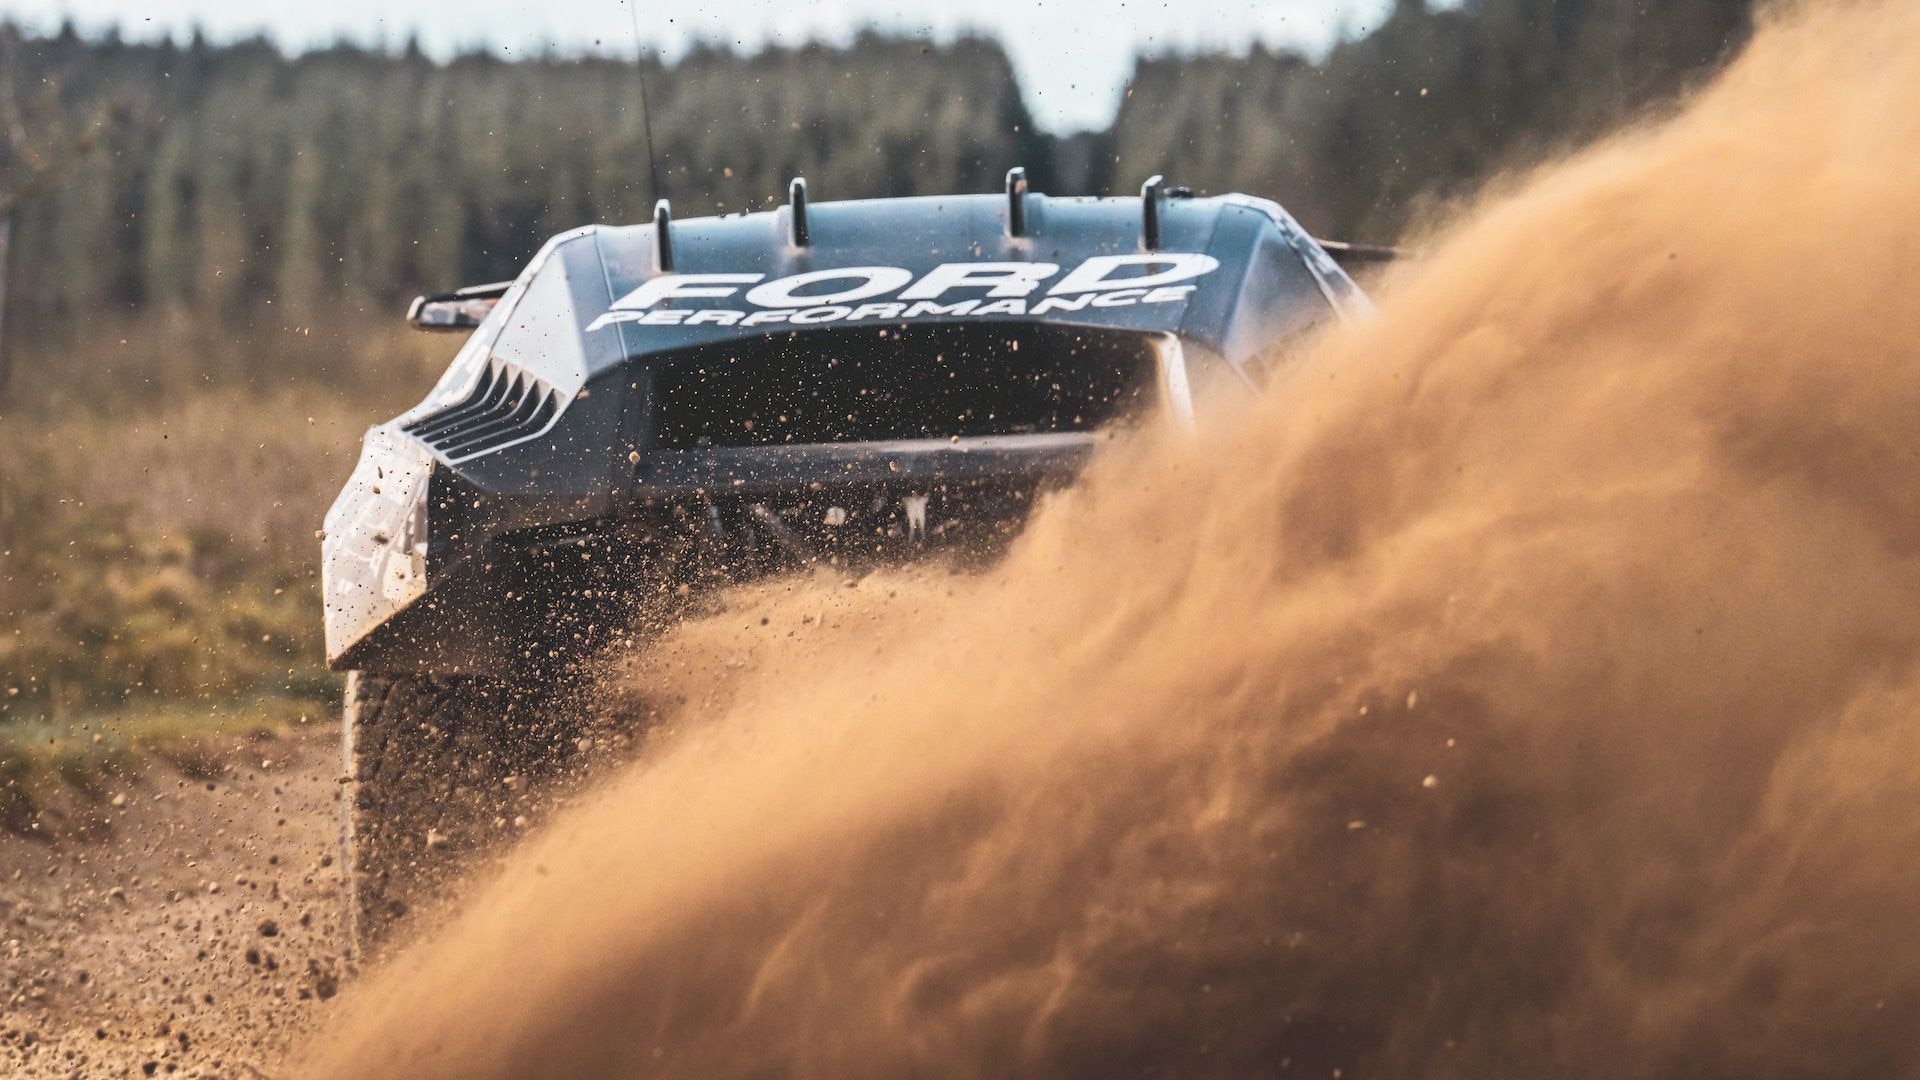 Teaser for Ford Raptor race truck competing in 2025 Dakar Rally